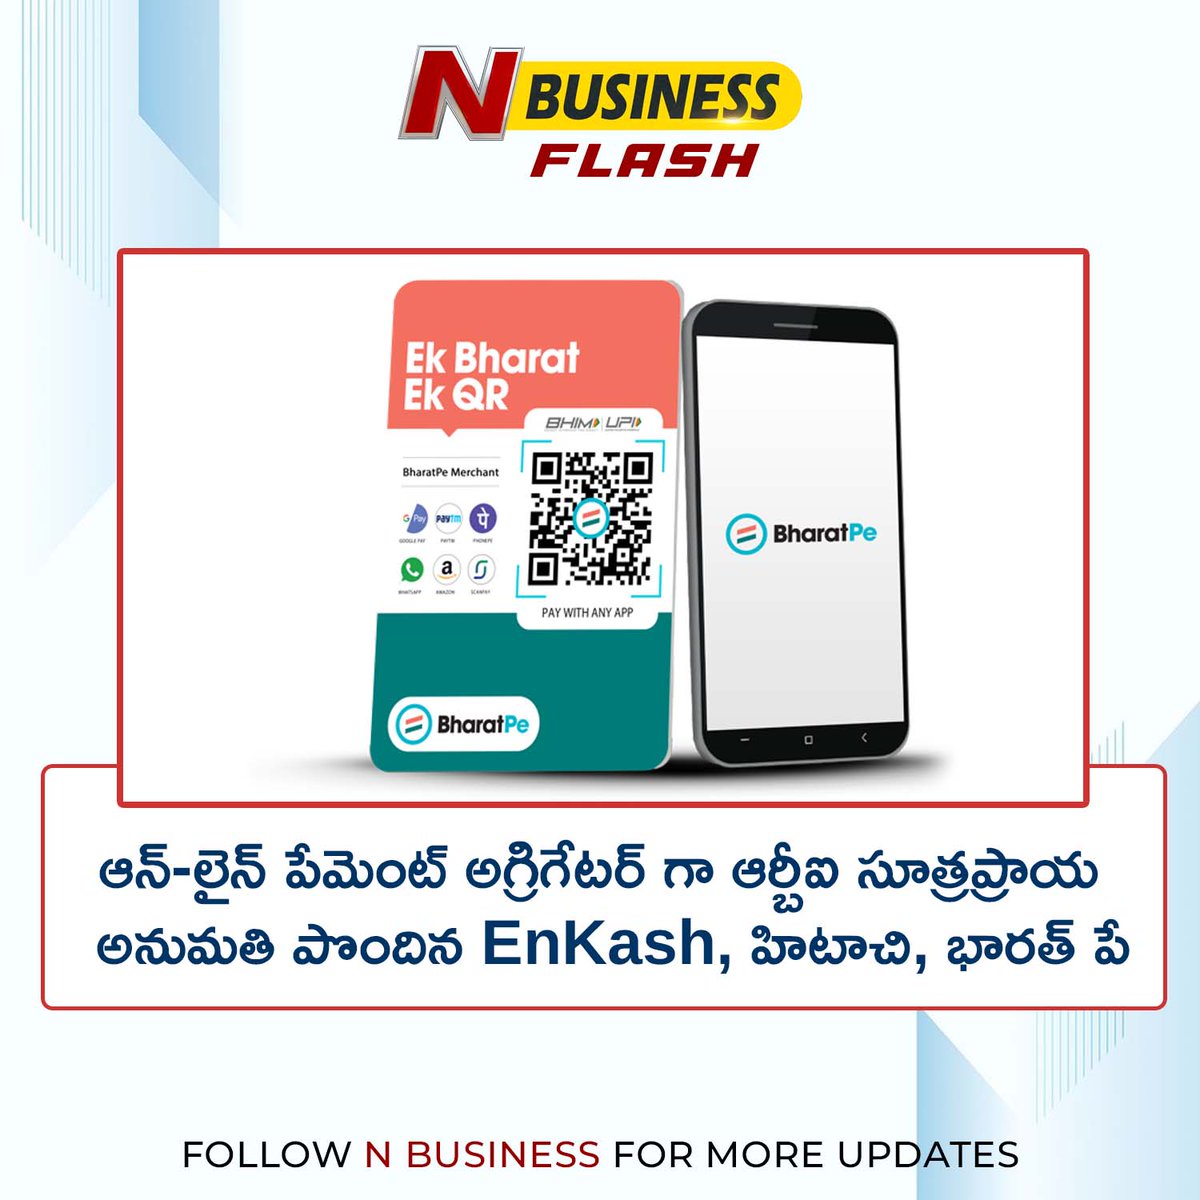 EnKash, Hitachi, Bharat Pay get in-principle approval from RBI as 'Online Payment Aggregator'.

#online #payment #hitachi #enkash #RBI #market #business #businessflash #NBusinessindia